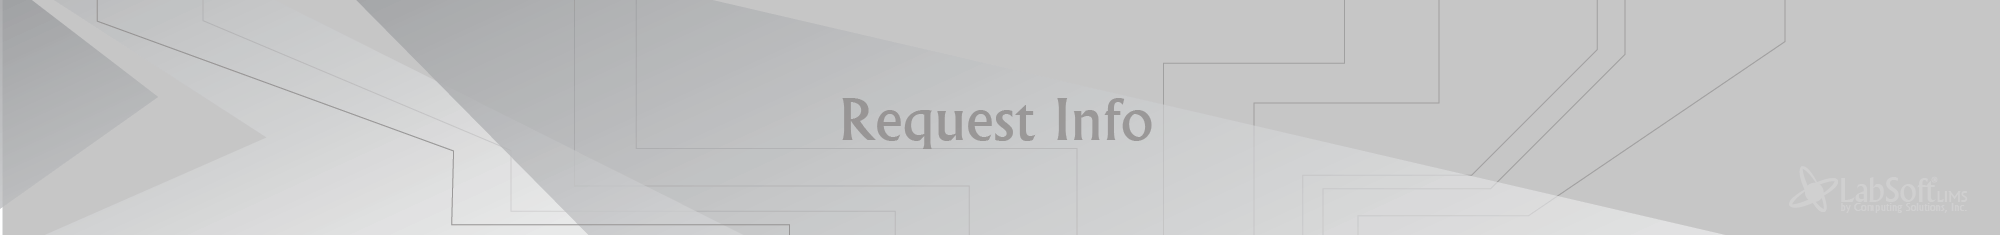 LabSoft LIMS Request for Information